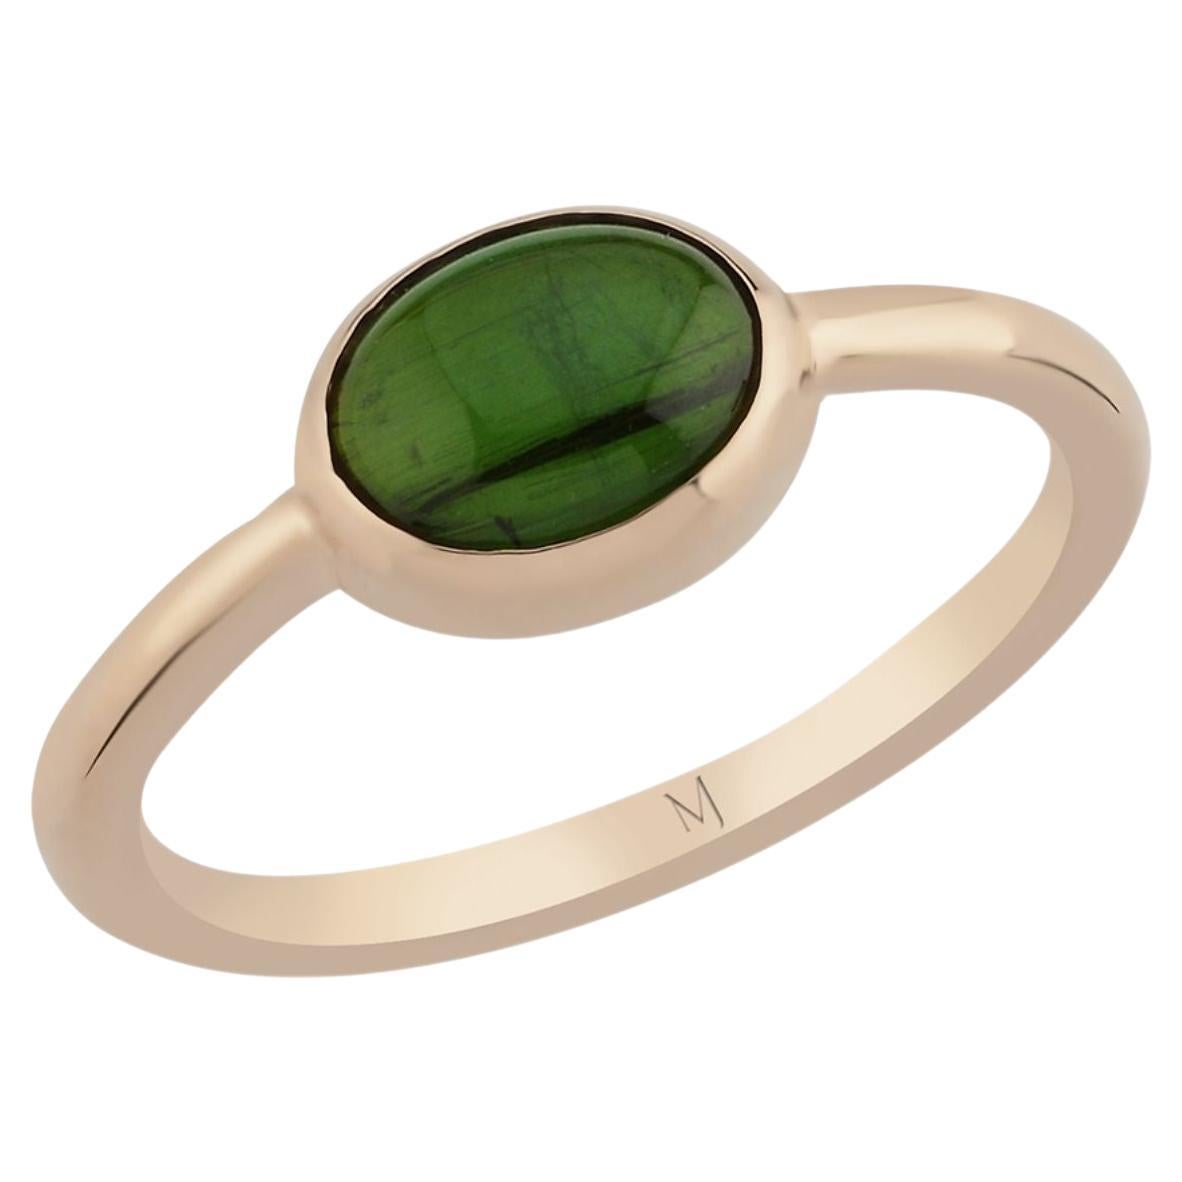 Melie Jewelry Gem Ring In 14K Gold with Green Tourmaline